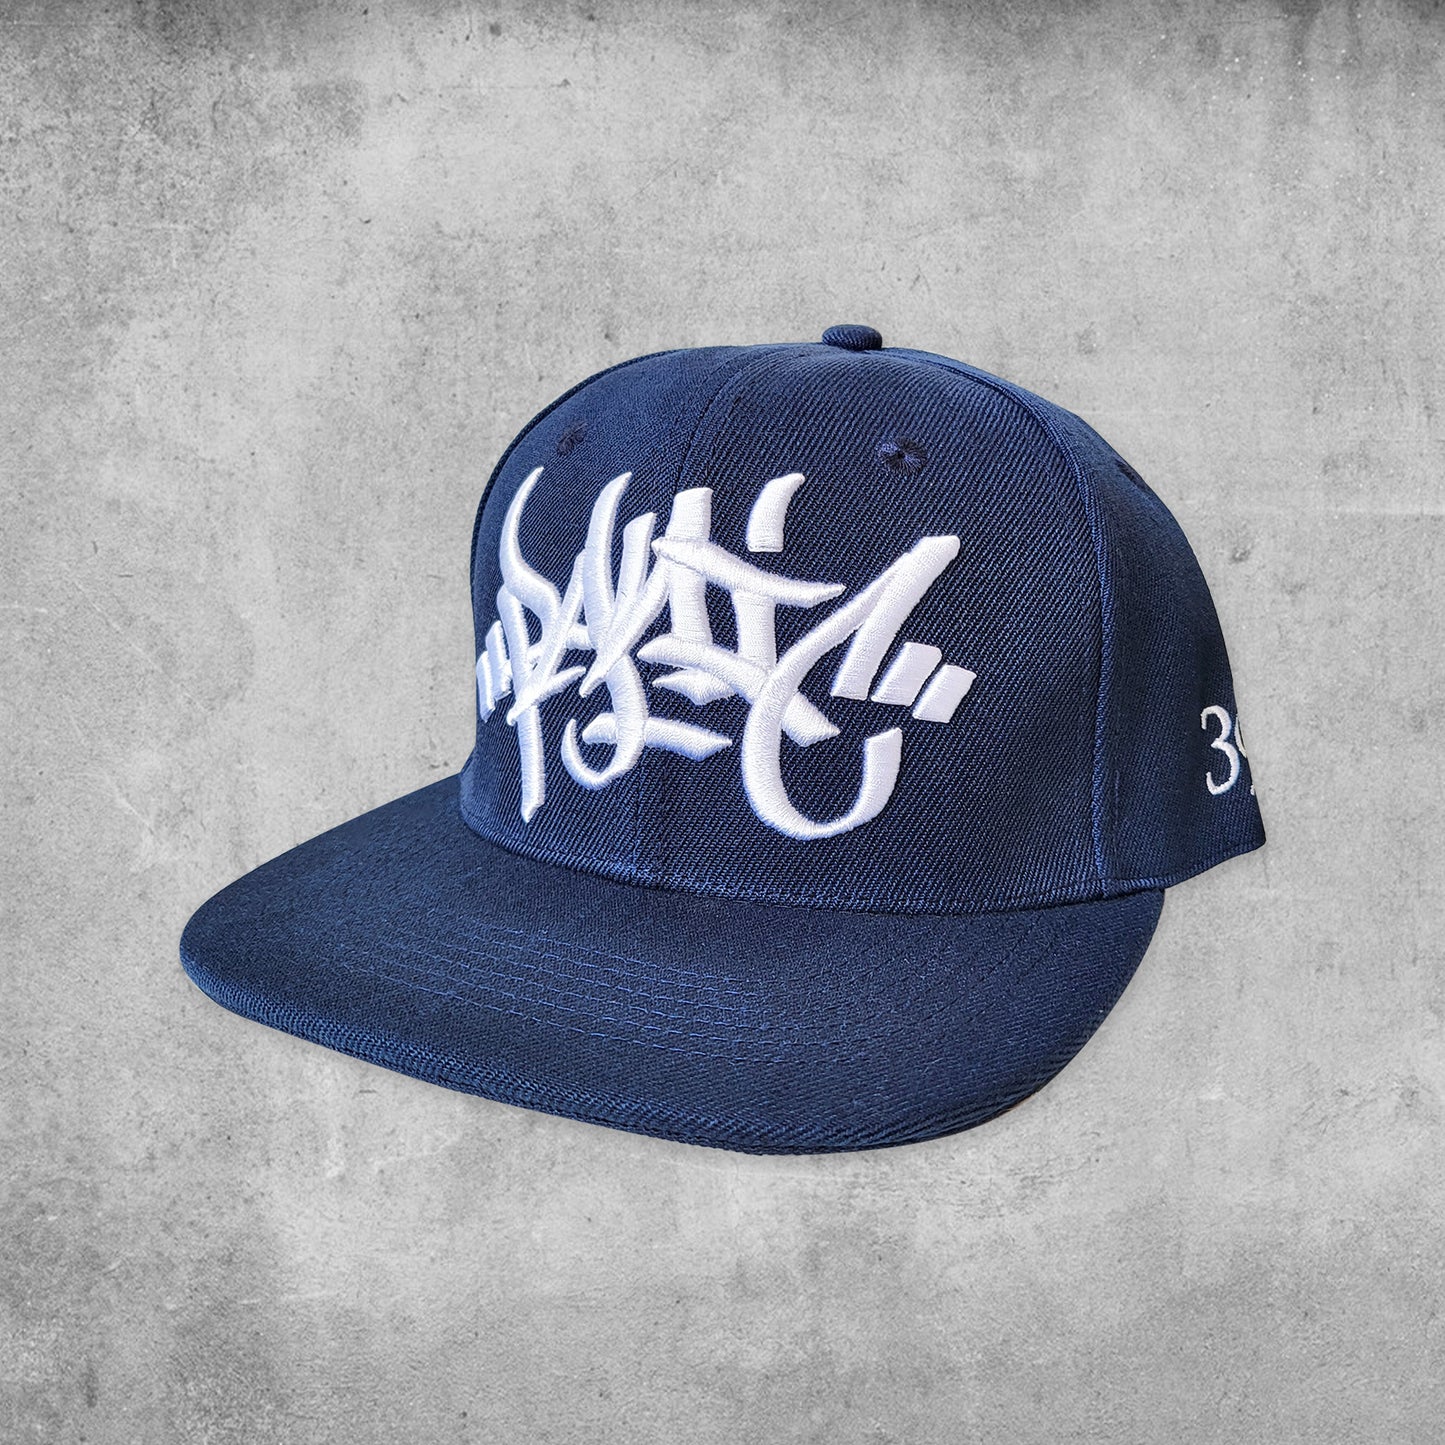 Panic 39 branded snap back hat in navy with white puff embroidery.